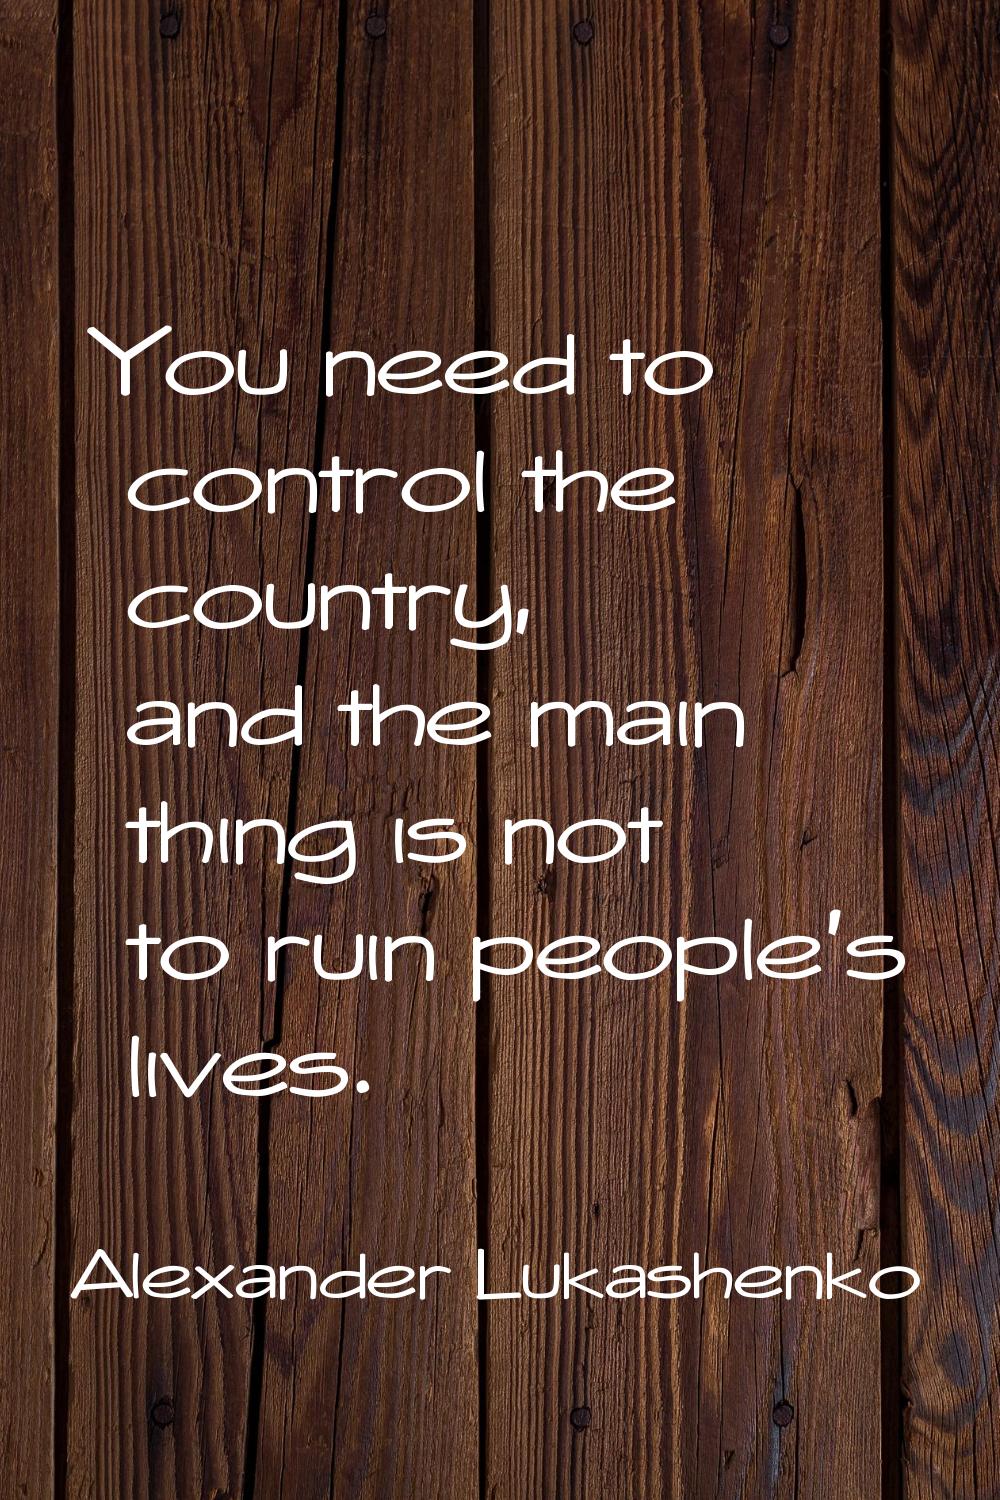 You need to control the country, and the main thing is not to ruin people's lives.